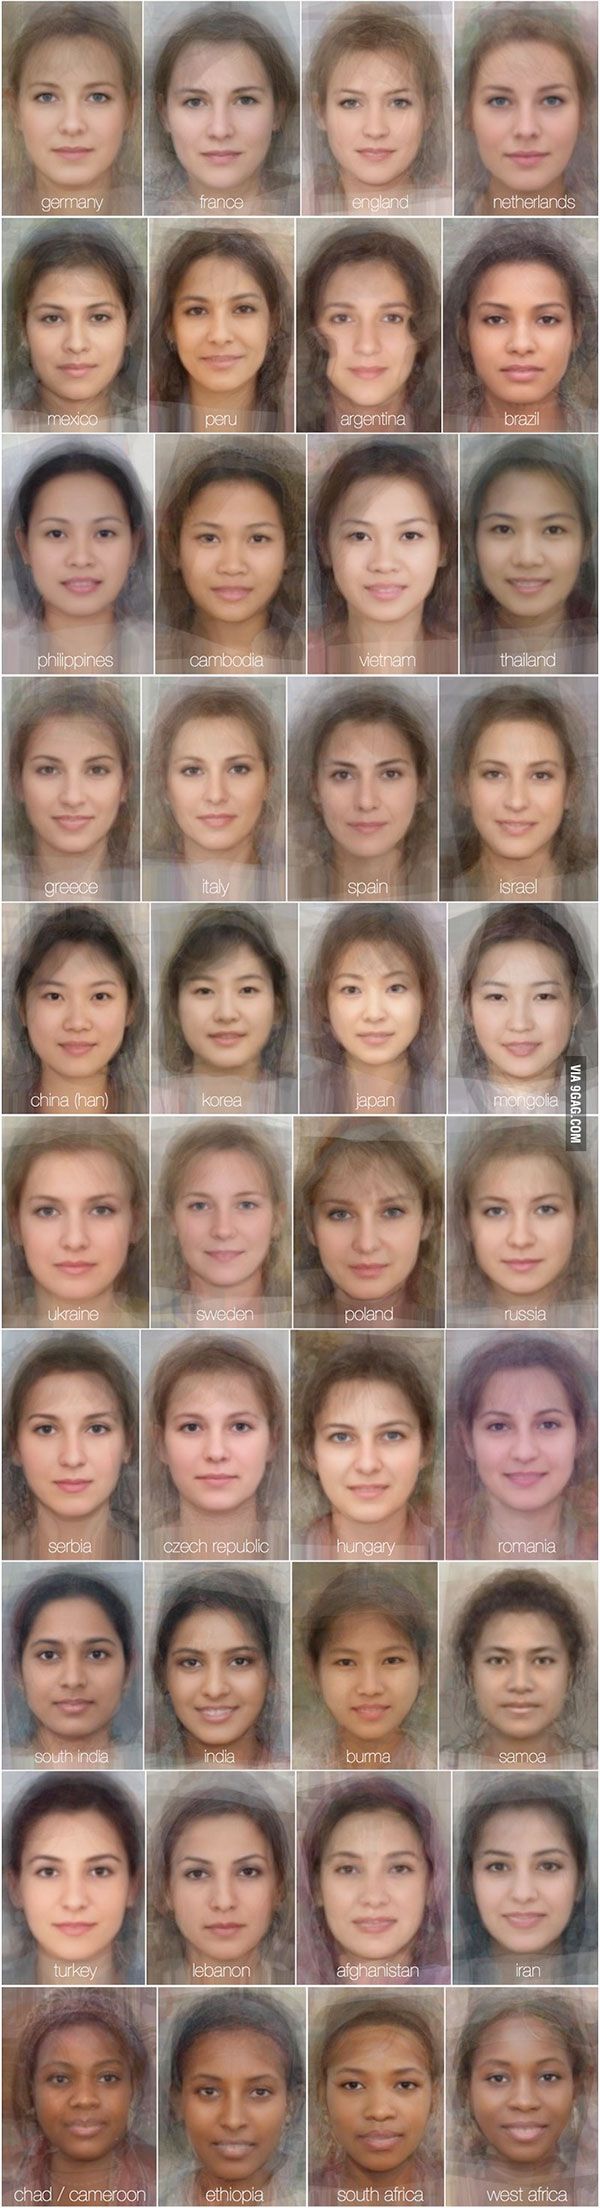 average women's faces from around the world